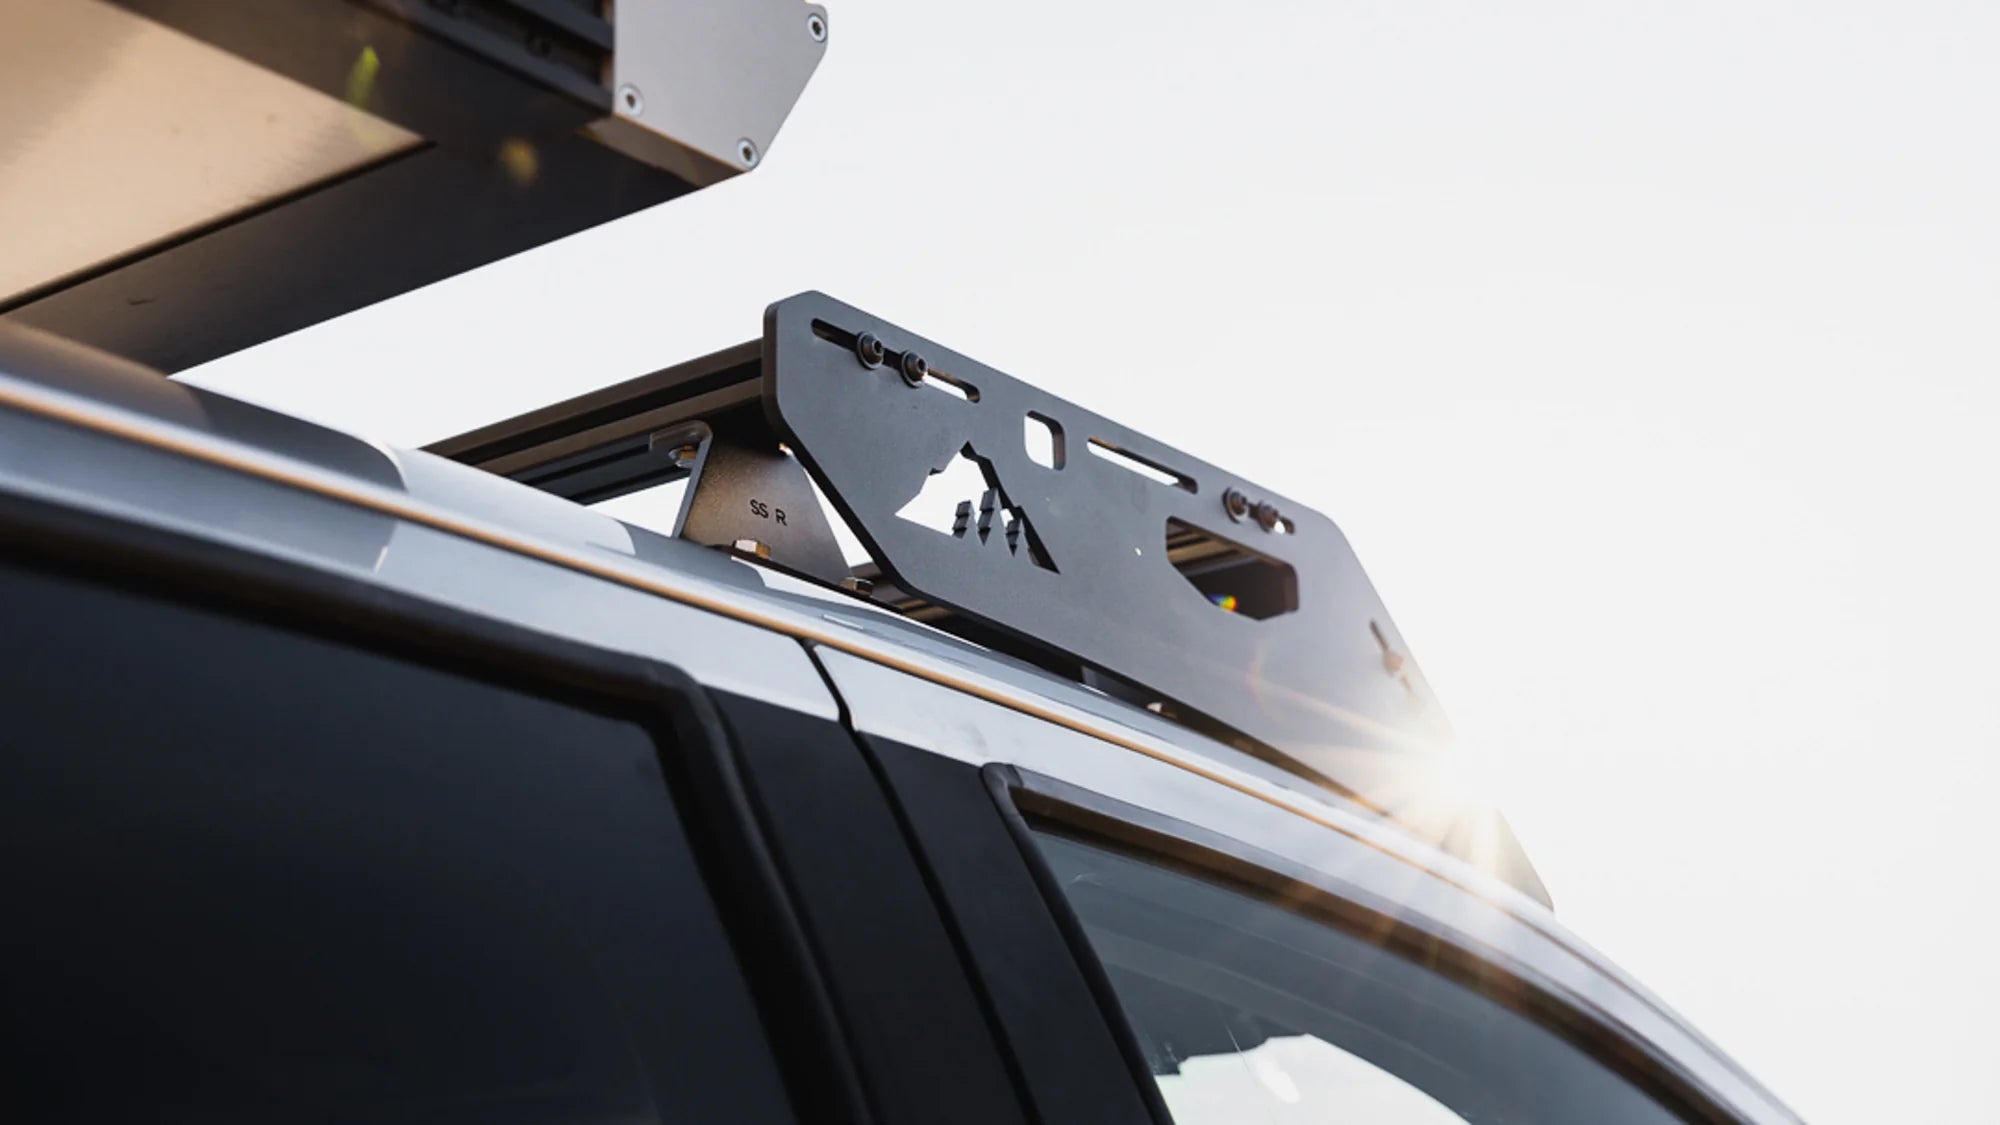 The Stratus - 2019-2023 Ford Ranger Supercrew Camper Rack by Sherpa